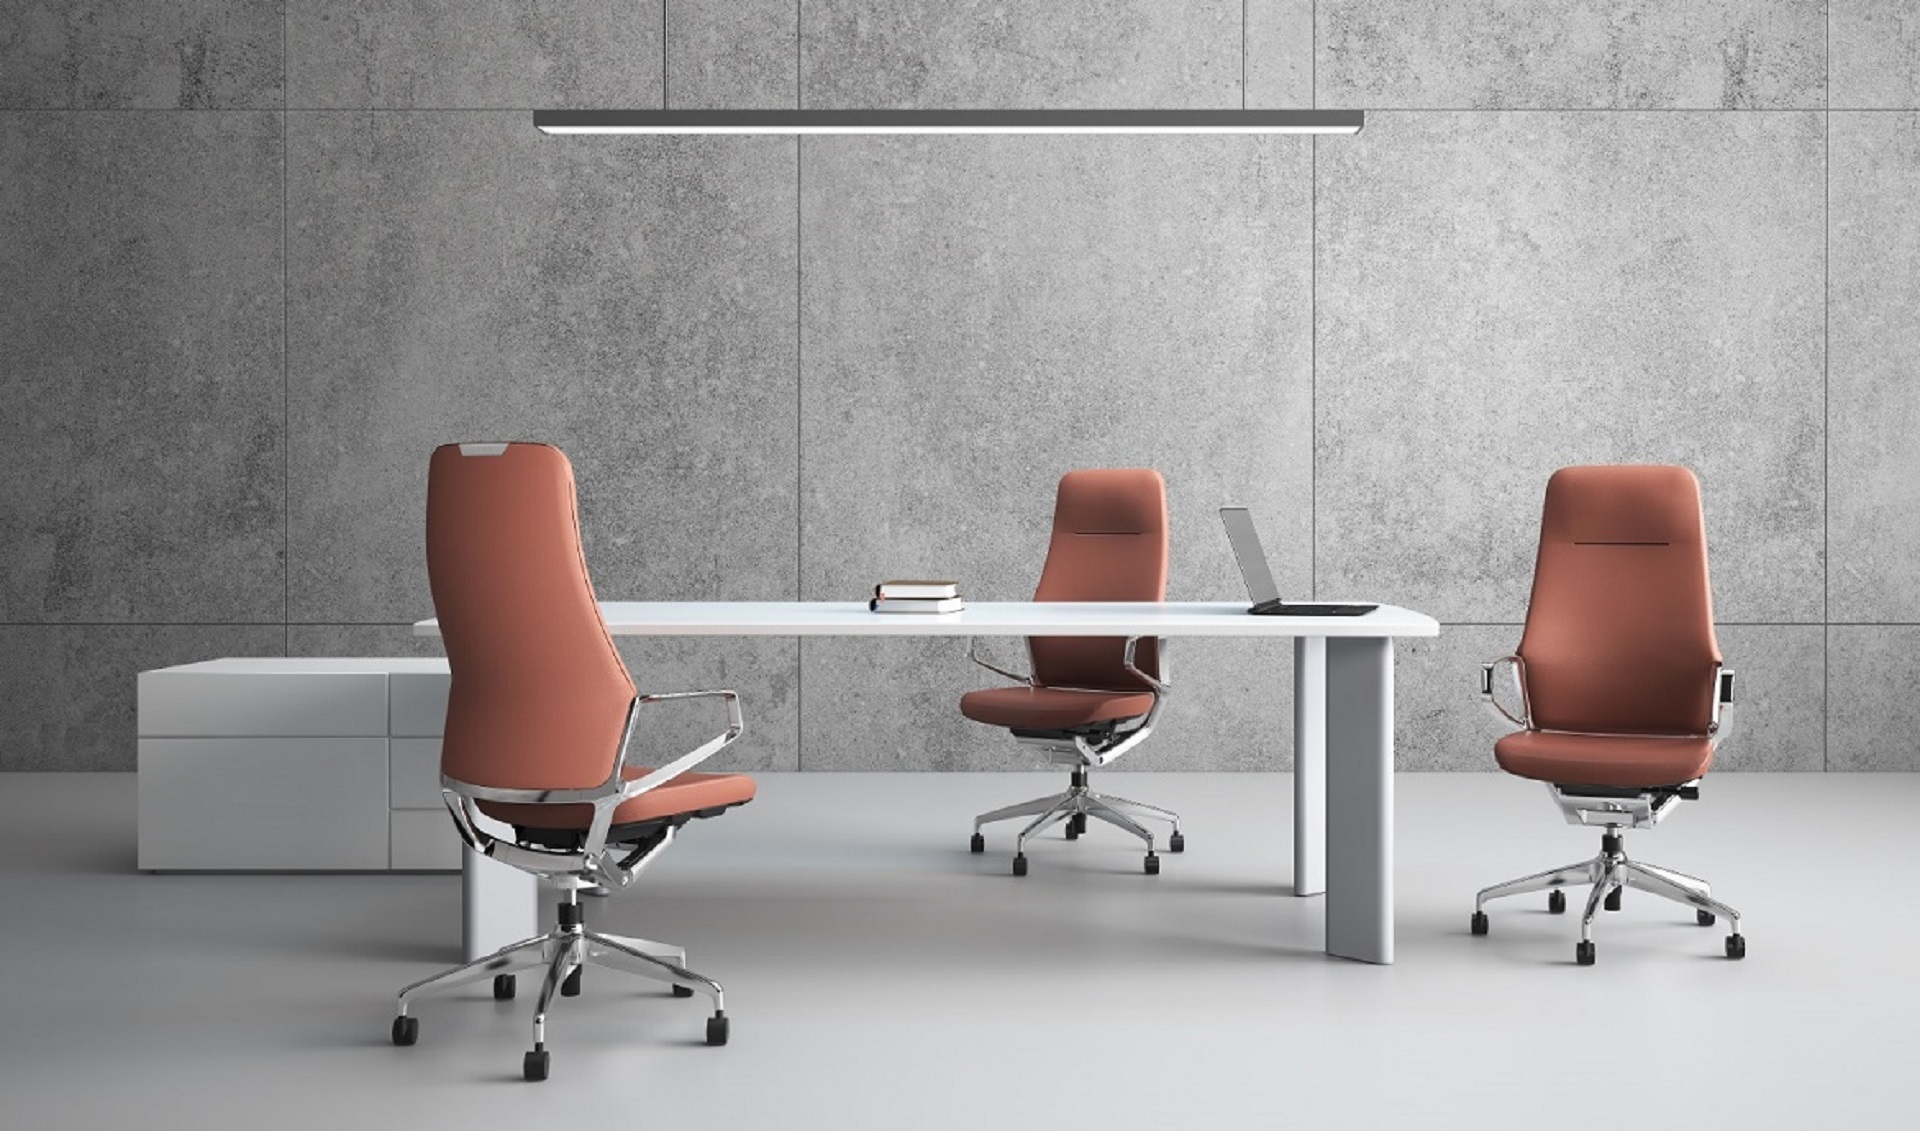 Why is the Arico the best leather office chair choice for your workspace?